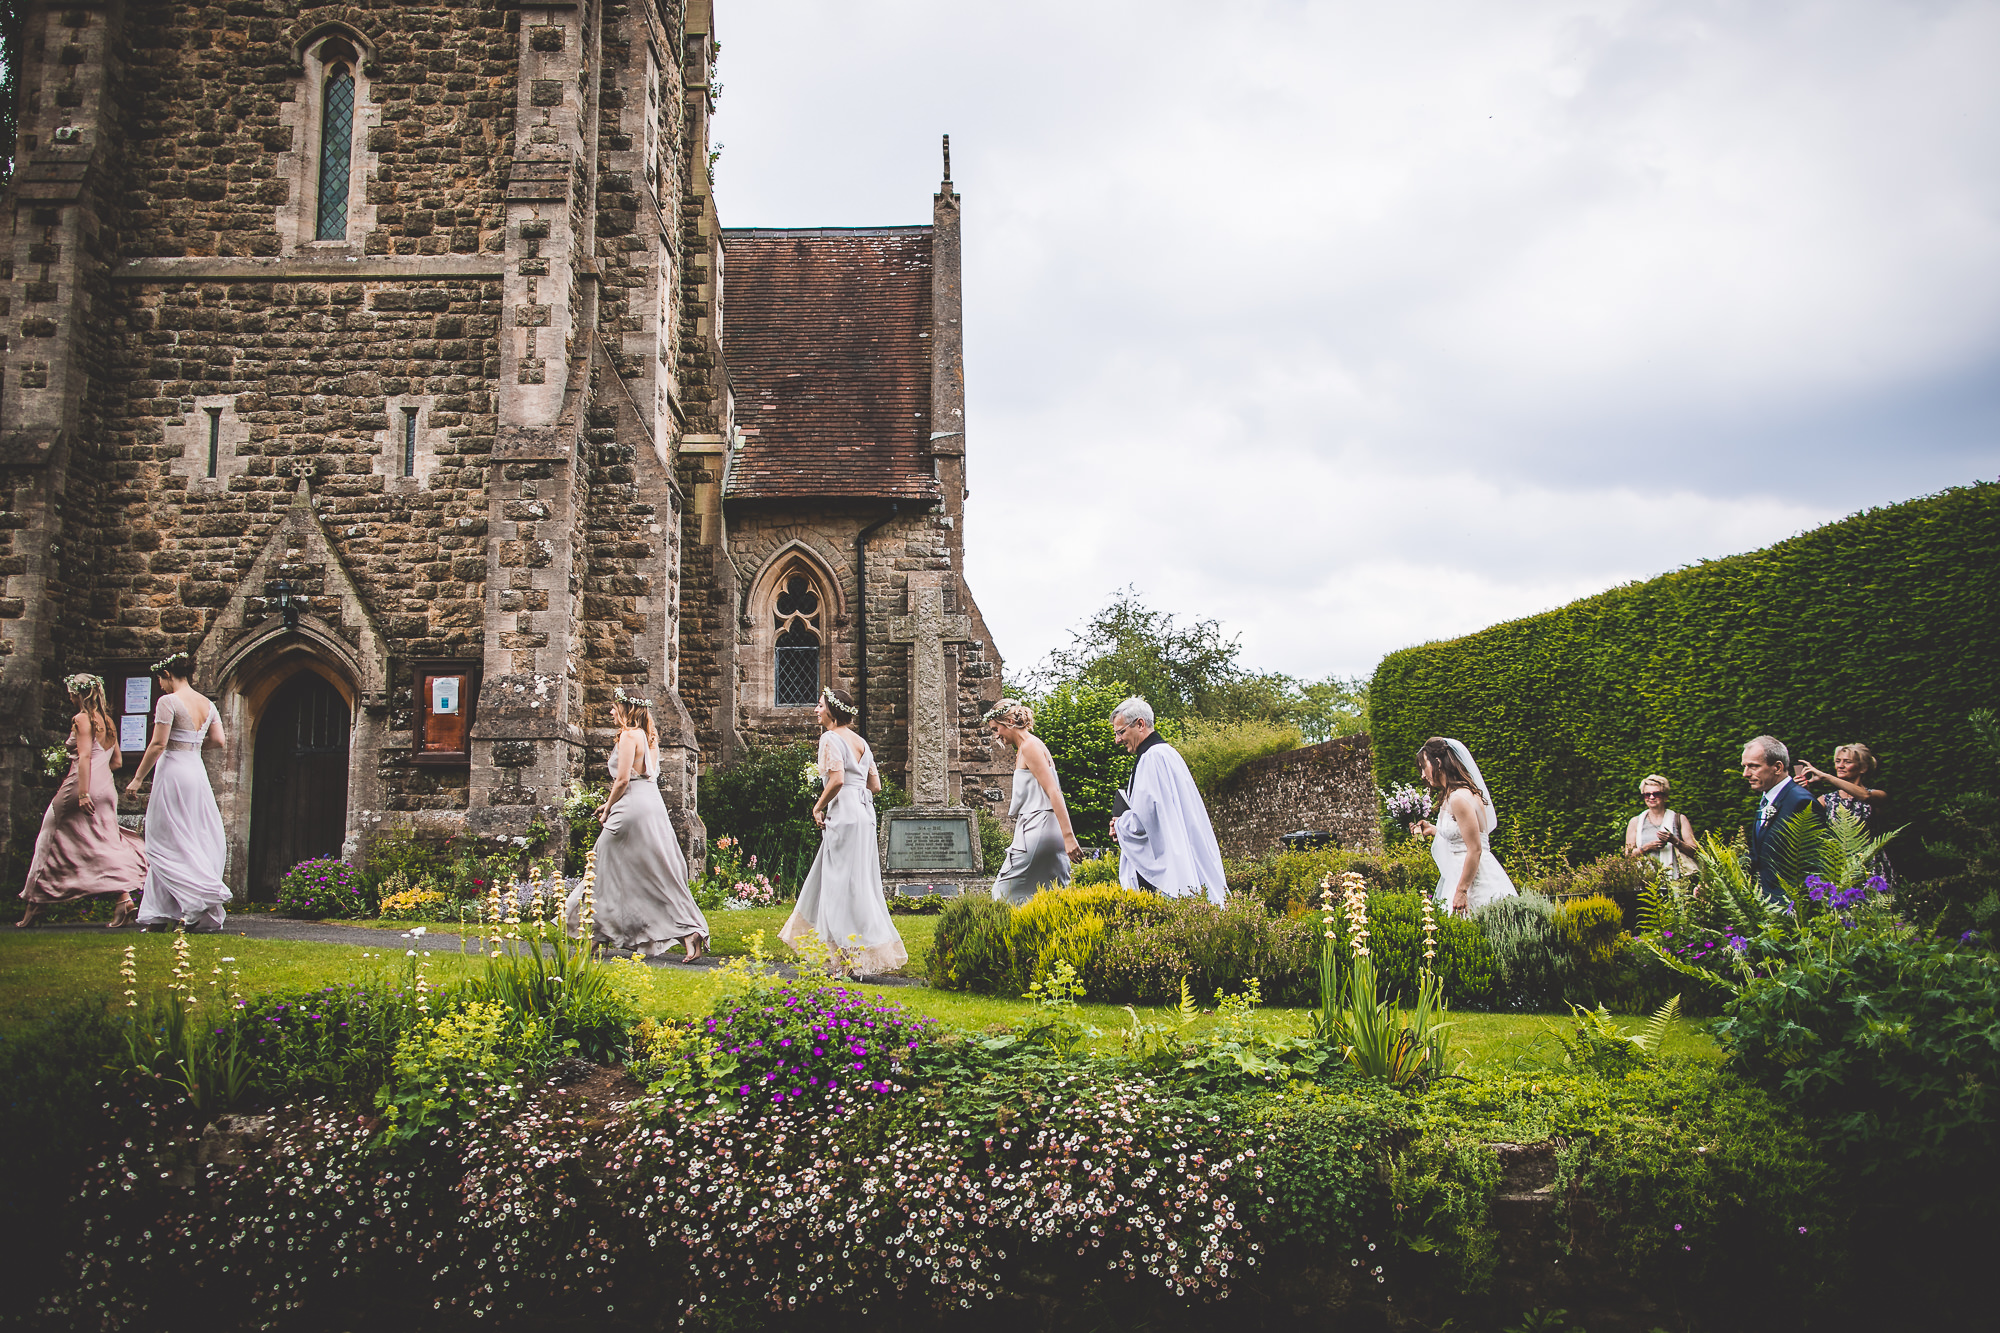 A group of brides and grooms posing for a wedding photographer in front of a church.